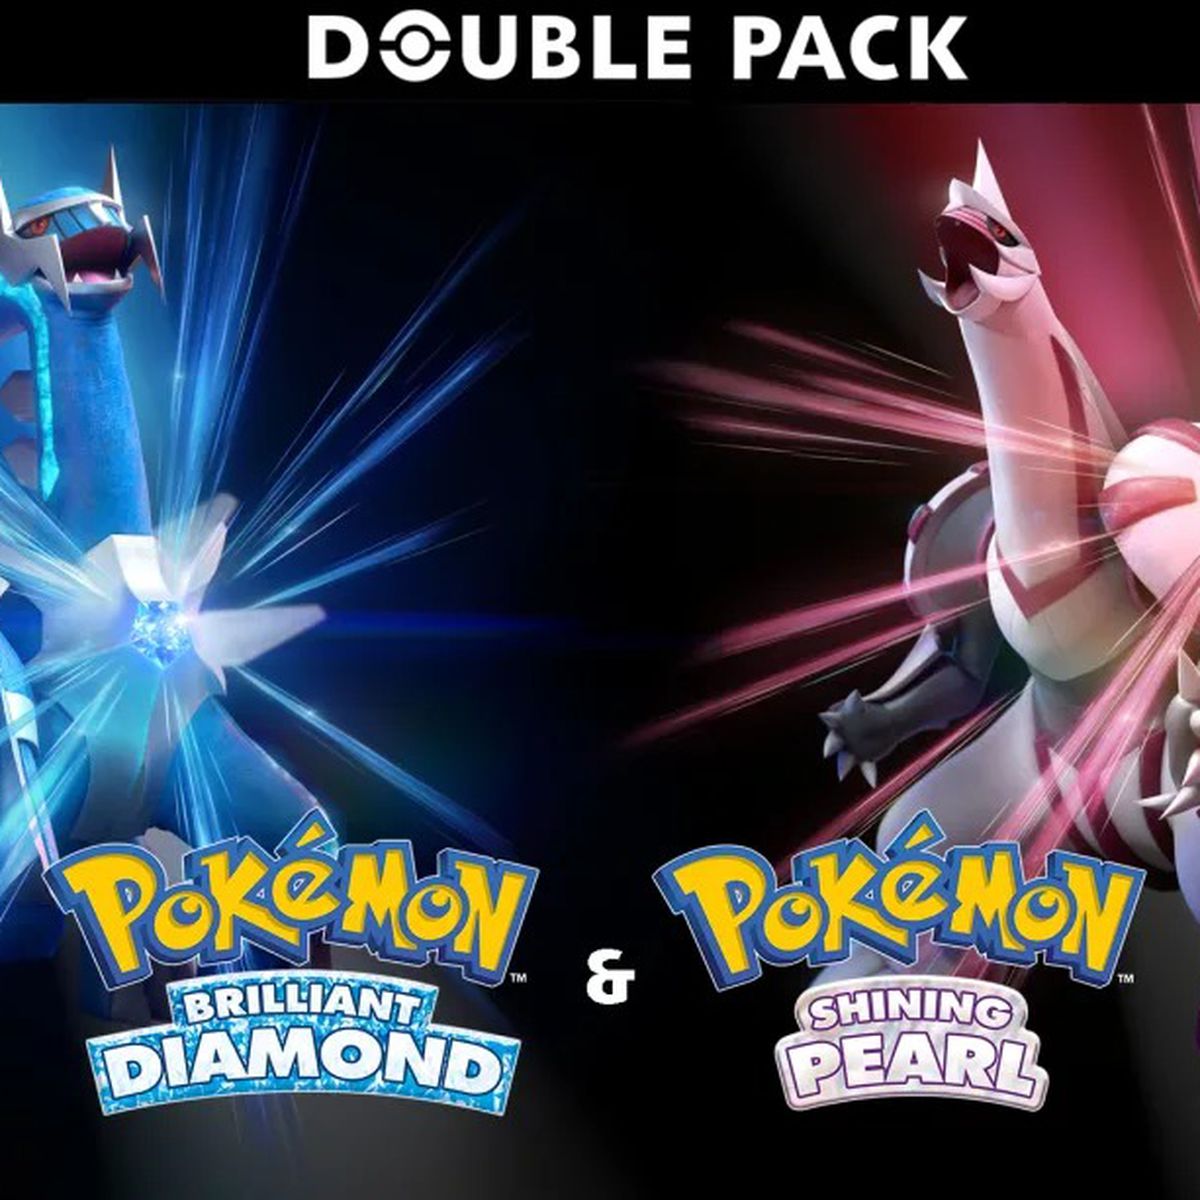 The cover art for Pokémon Brilliant Diamond and Shining Pearl 